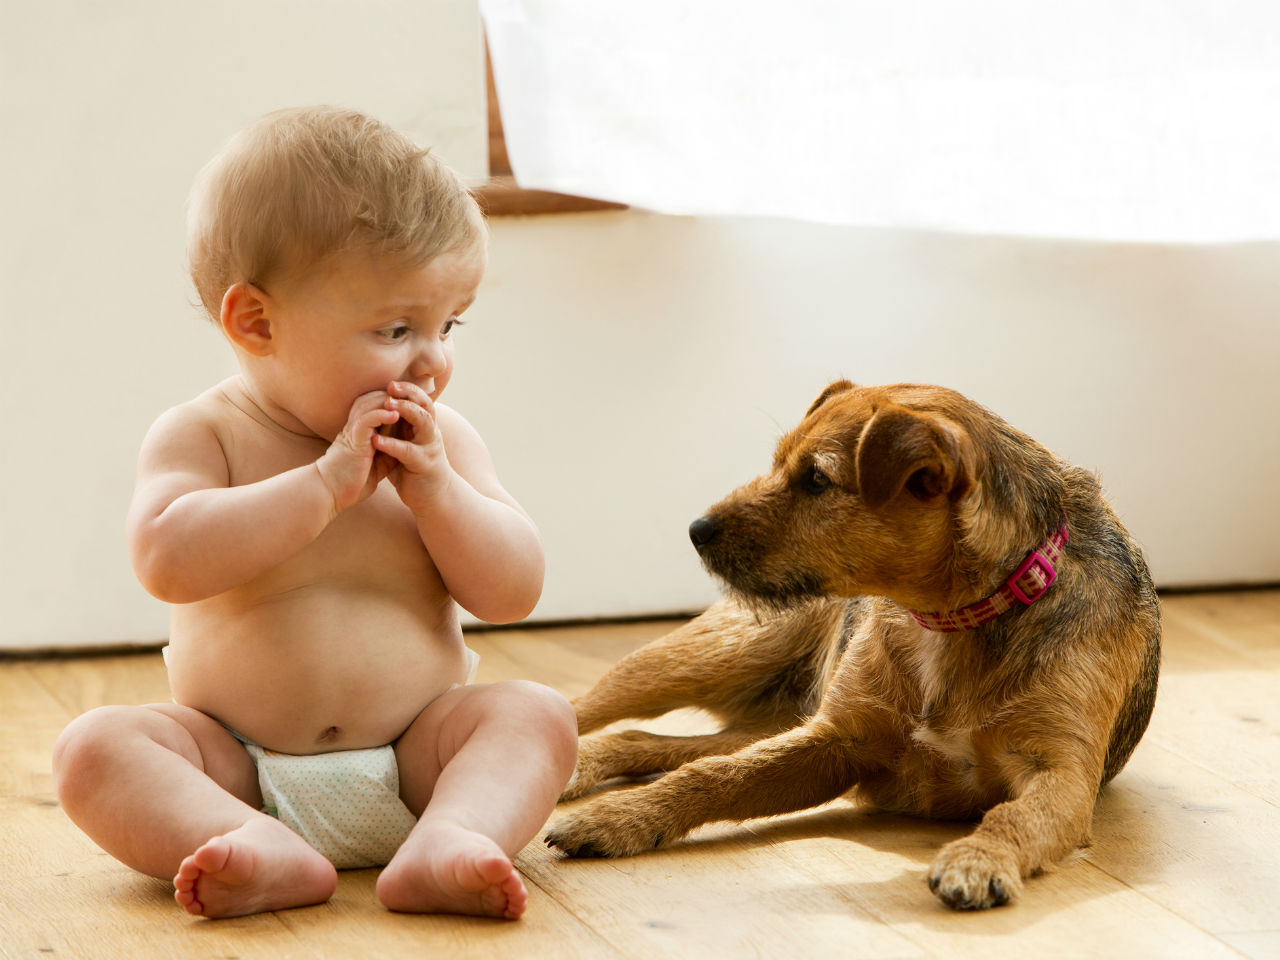 Can a baby get sick from a dog?